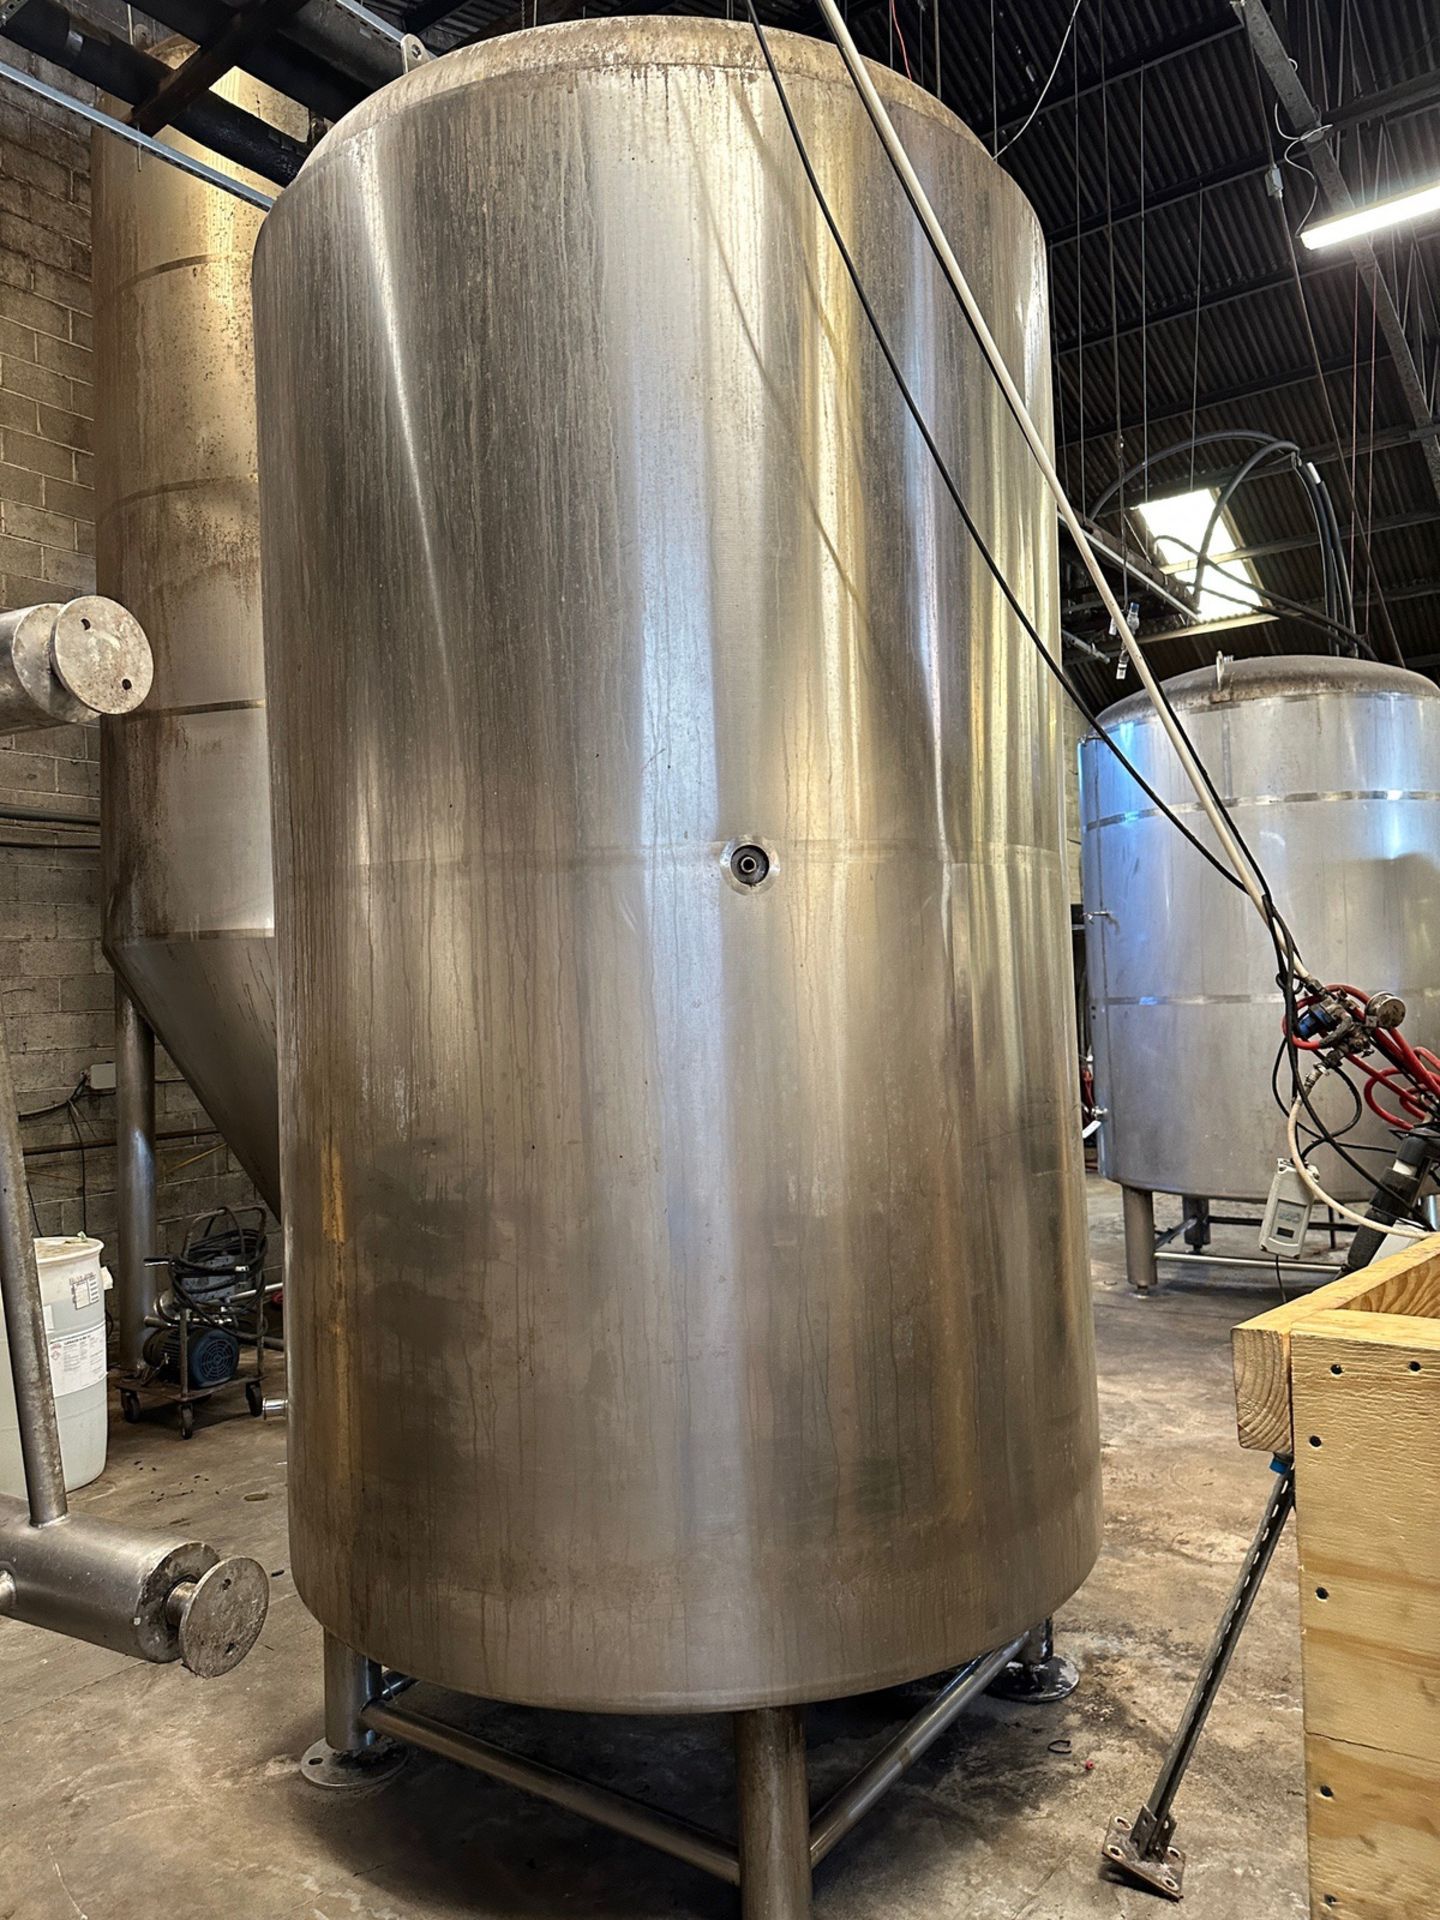 Premier Stainless 60 BBL Stainless Steel Brite Tank - Dish Bottom, Glycol Jacketed, | Rig Fee $750 - Image 4 of 4